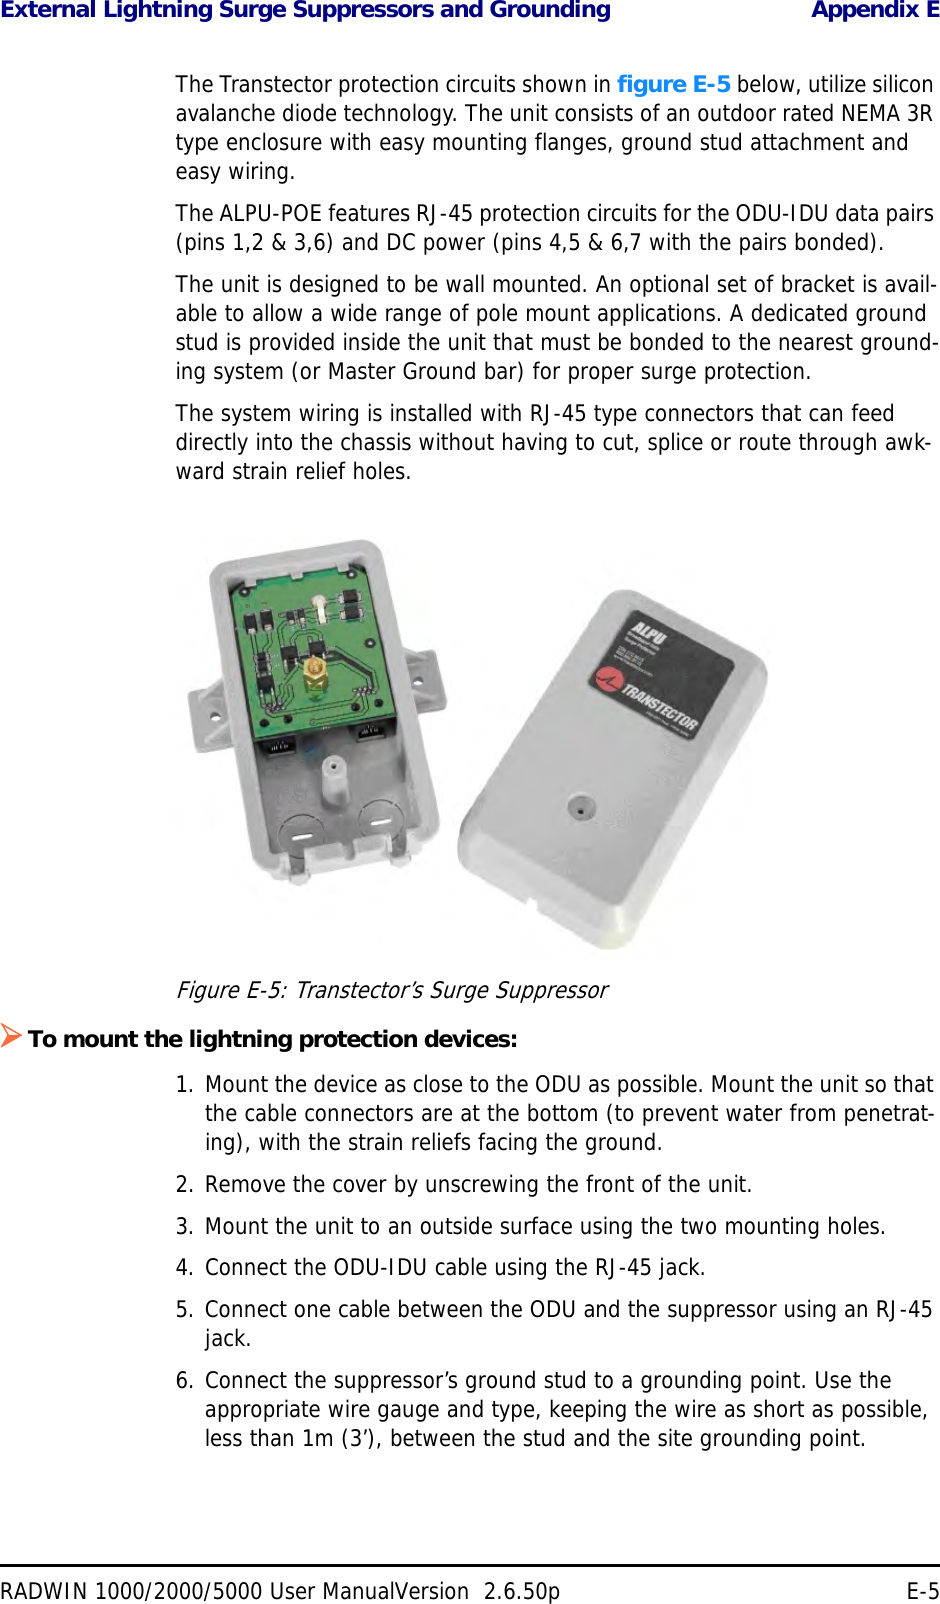 External Lightning Surge Suppressors and Grounding Appendix ERADWIN 1000/2000/5000 User ManualVersion  2.6.50p E-5The Transtector protection circuits shown in figure E-5 below, utilize silicon avalanche diode technology. The unit consists of an outdoor rated NEMA 3R type enclosure with easy mounting flanges, ground stud attachment and easy wiring.The ALPU-POE features RJ-45 protection circuits for the ODU-IDU data pairs (pins 1,2 &amp; 3,6) and DC power (pins 4,5 &amp; 6,7 with the pairs bonded).The unit is designed to be wall mounted. An optional set of bracket is avail-able to allow a wide range of pole mount applications. A dedicated ground stud is provided inside the unit that must be bonded to the nearest ground-ing system (or Master Ground bar) for proper surge protection.The system wiring is installed with RJ-45 type connectors that can feed directly into the chassis without having to cut, splice or route through awk-ward strain relief holes.Figure E-5: Transtector’s Surge SuppressorTo mount the lightning protection devices:1. Mount the device as close to the ODU as possible. Mount the unit so that the cable connectors are at the bottom (to prevent water from penetrat-ing), with the strain reliefs facing the ground.2. Remove the cover by unscrewing the front of the unit.3. Mount the unit to an outside surface using the two mounting holes.4. Connect the ODU-IDU cable using the RJ-45 jack.5. Connect one cable between the ODU and the suppressor using an RJ-45 jack.6. Connect the suppressor’s ground stud to a grounding point. Use the appropriate wire gauge and type, keeping the wire as short as possible, less than 1m (3’), between the stud and the site grounding point.